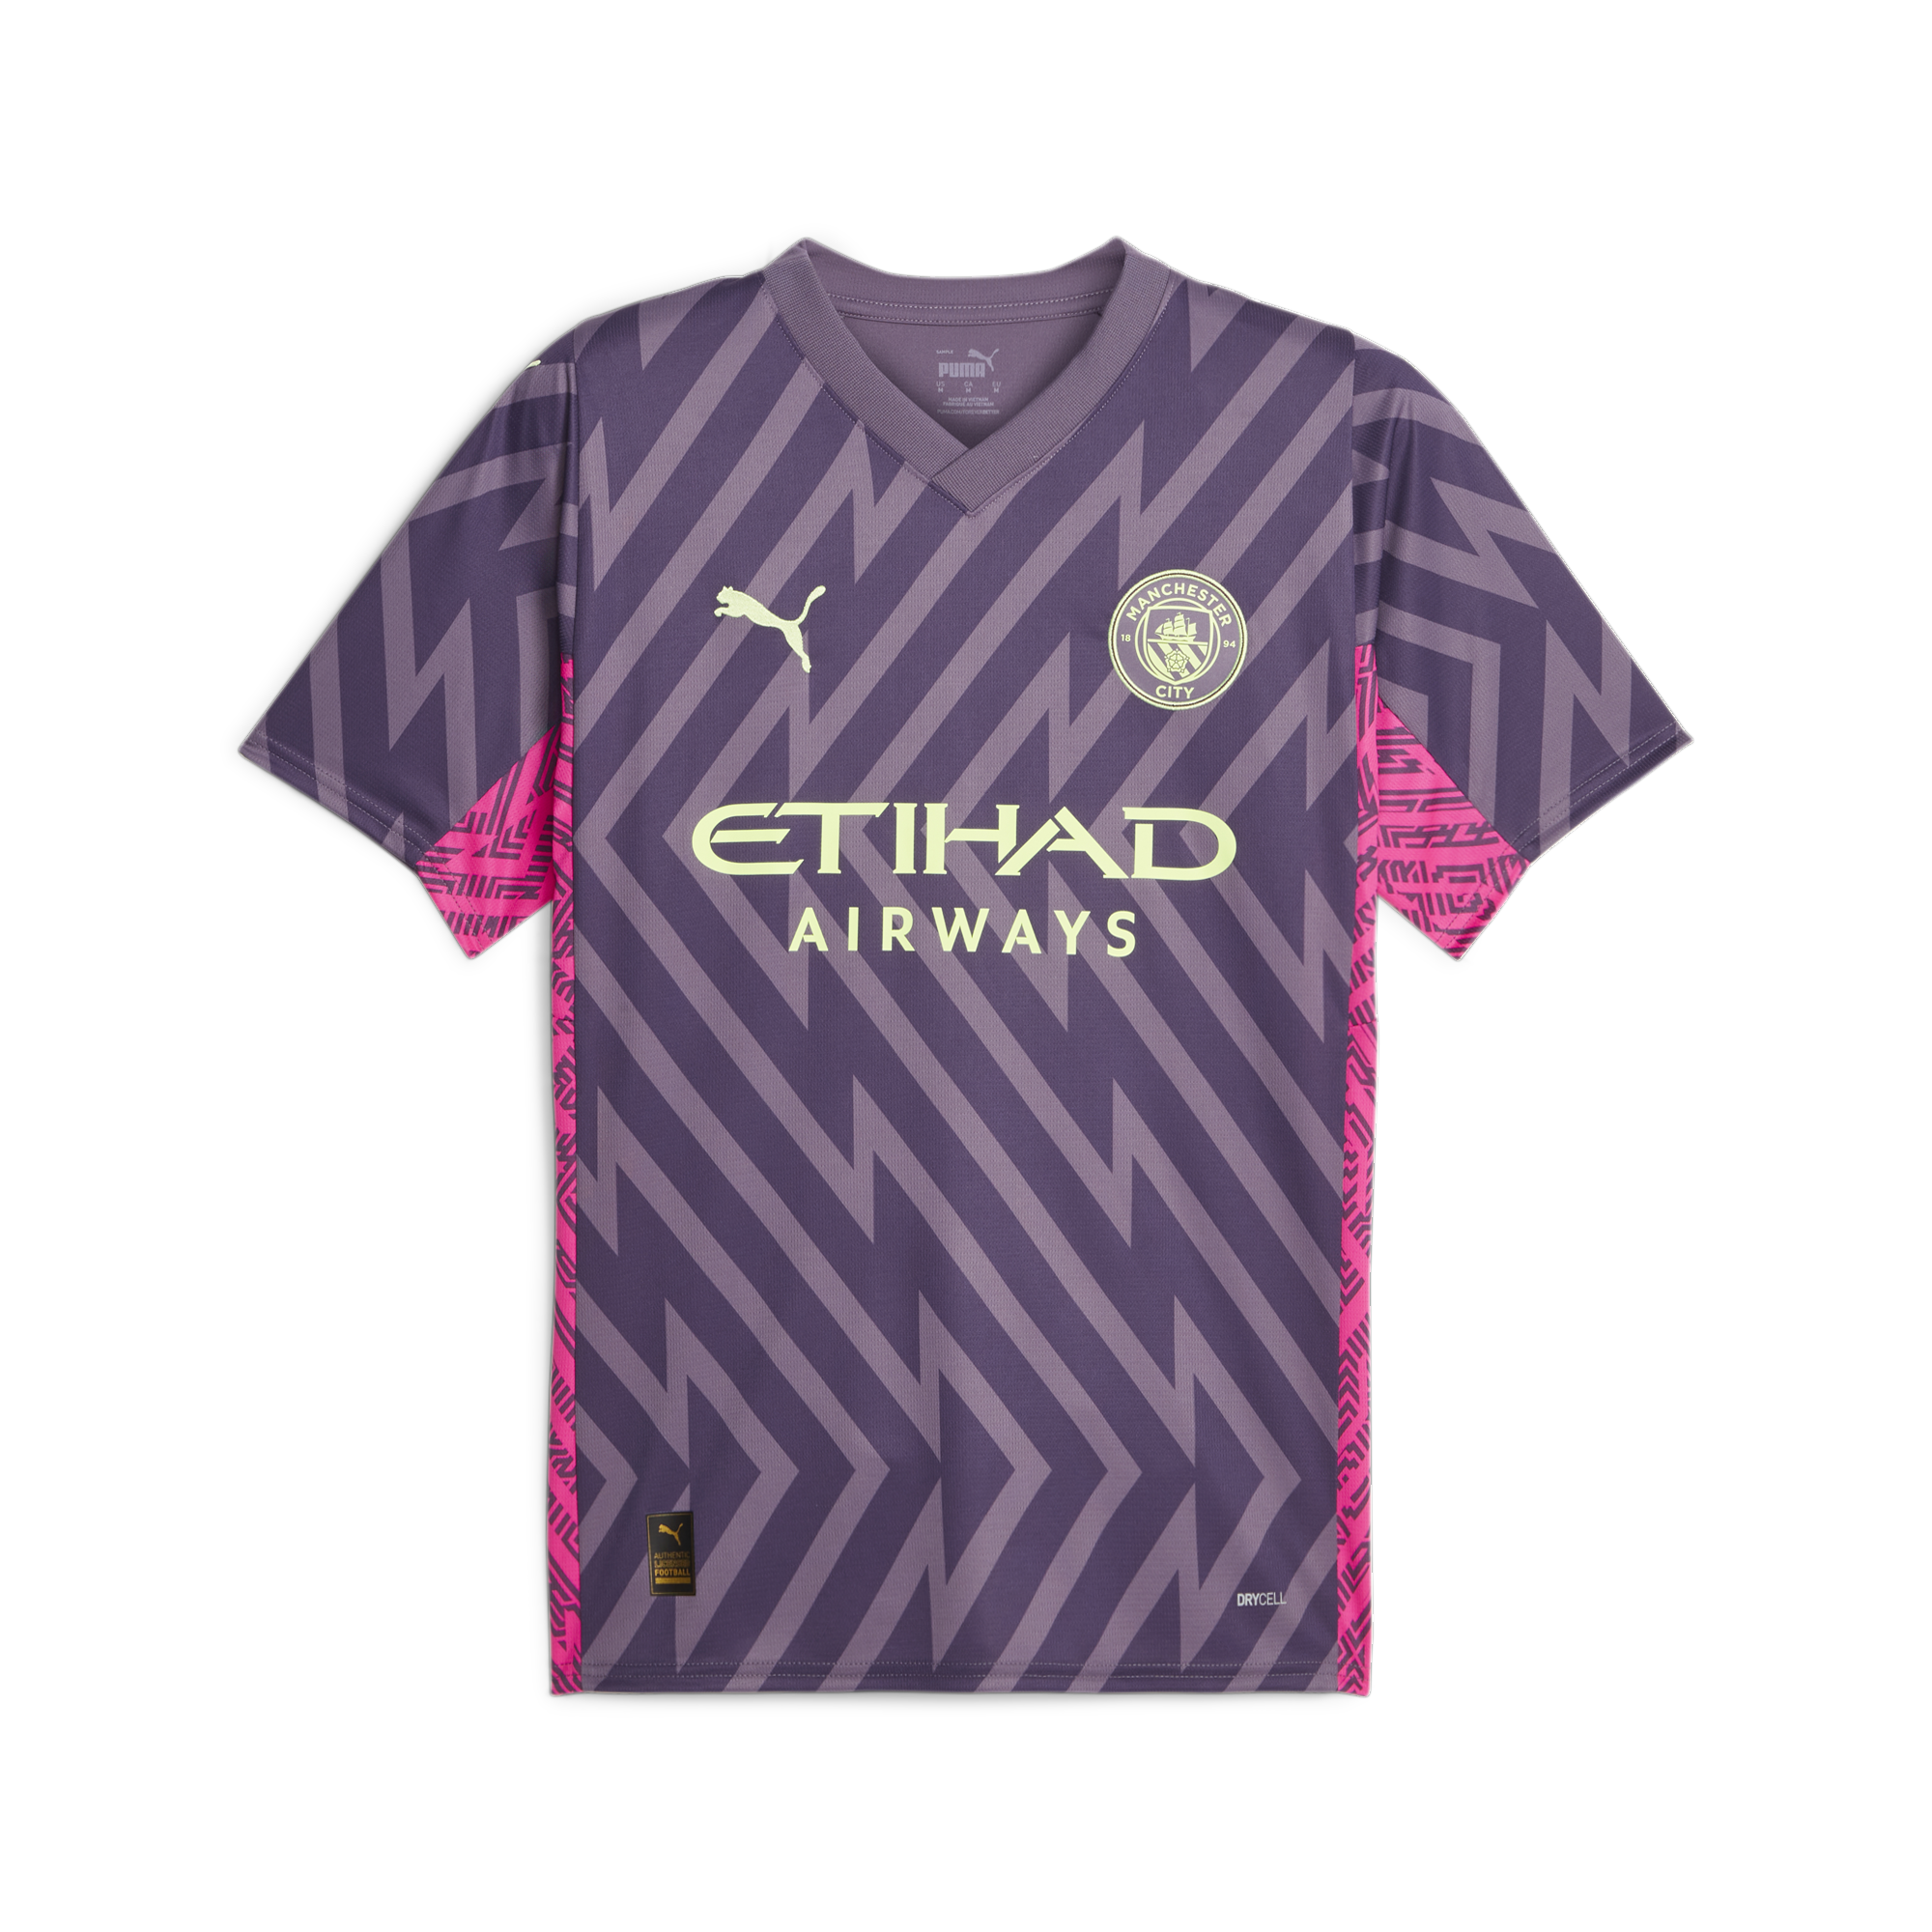 Why an All White Goalkeeper Kit, When you can get All Pink!